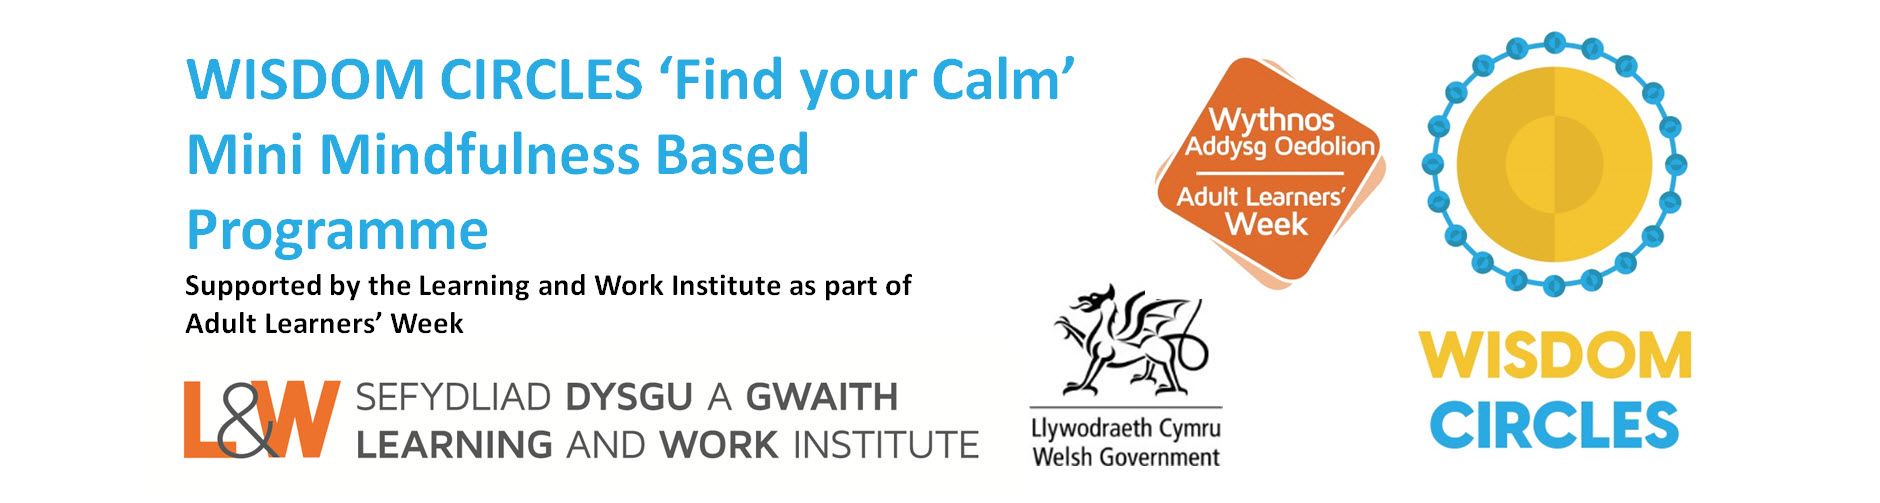 find-your-calm-a-free-online-3-part-mini-mindfulness-based-programme